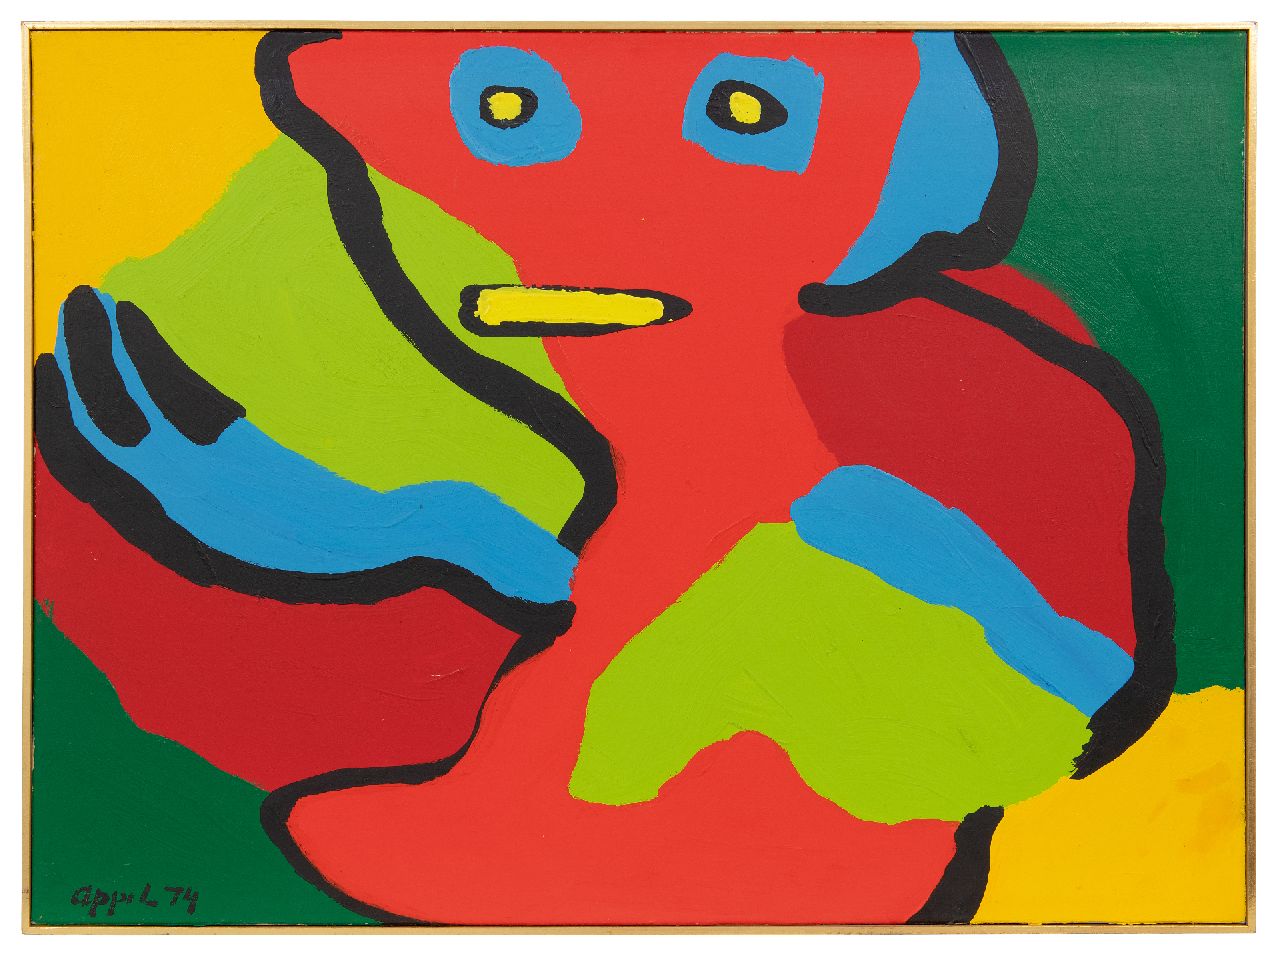 Appel C.K.  | Christiaan 'Karel' Appel | Paintings offered for sale | Asking again, acrylic on paper on canvas 56.0 x 75.9 cm, signed l.l. and dated '74